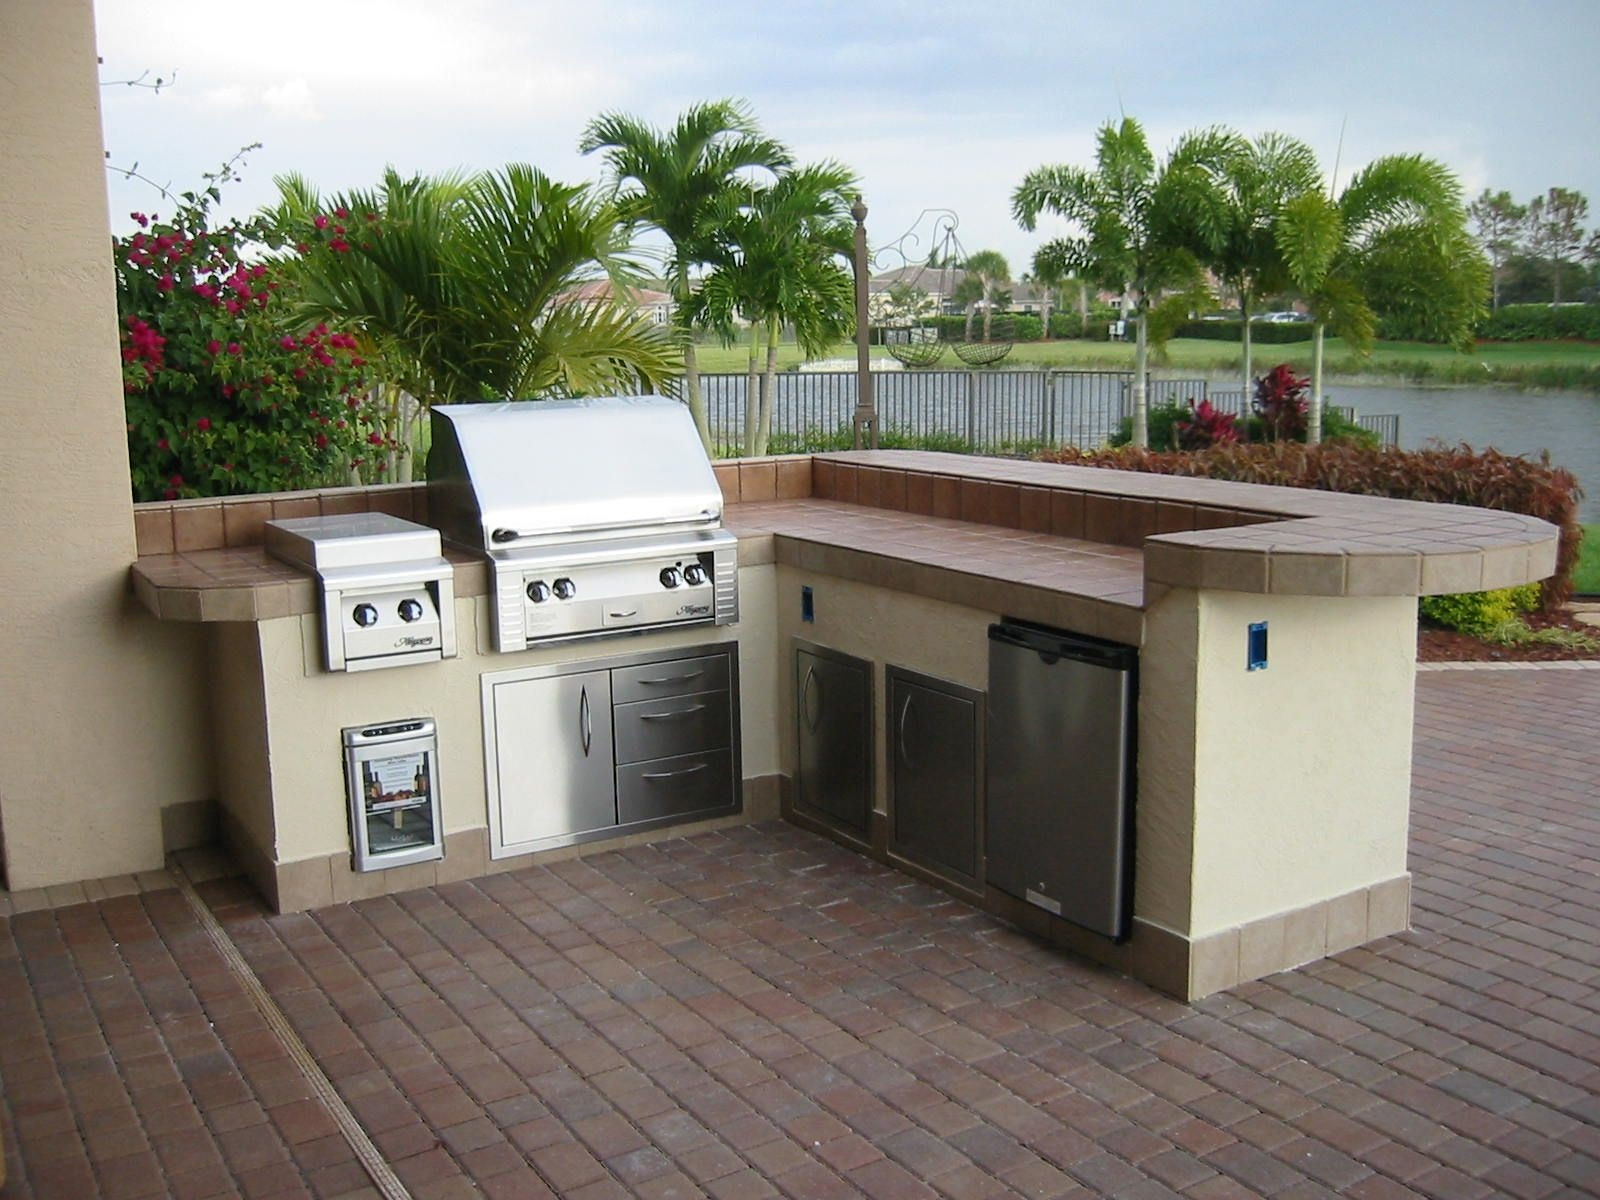 Lowes Outdoor Kitchen
 40 Awesome Stove Lowes